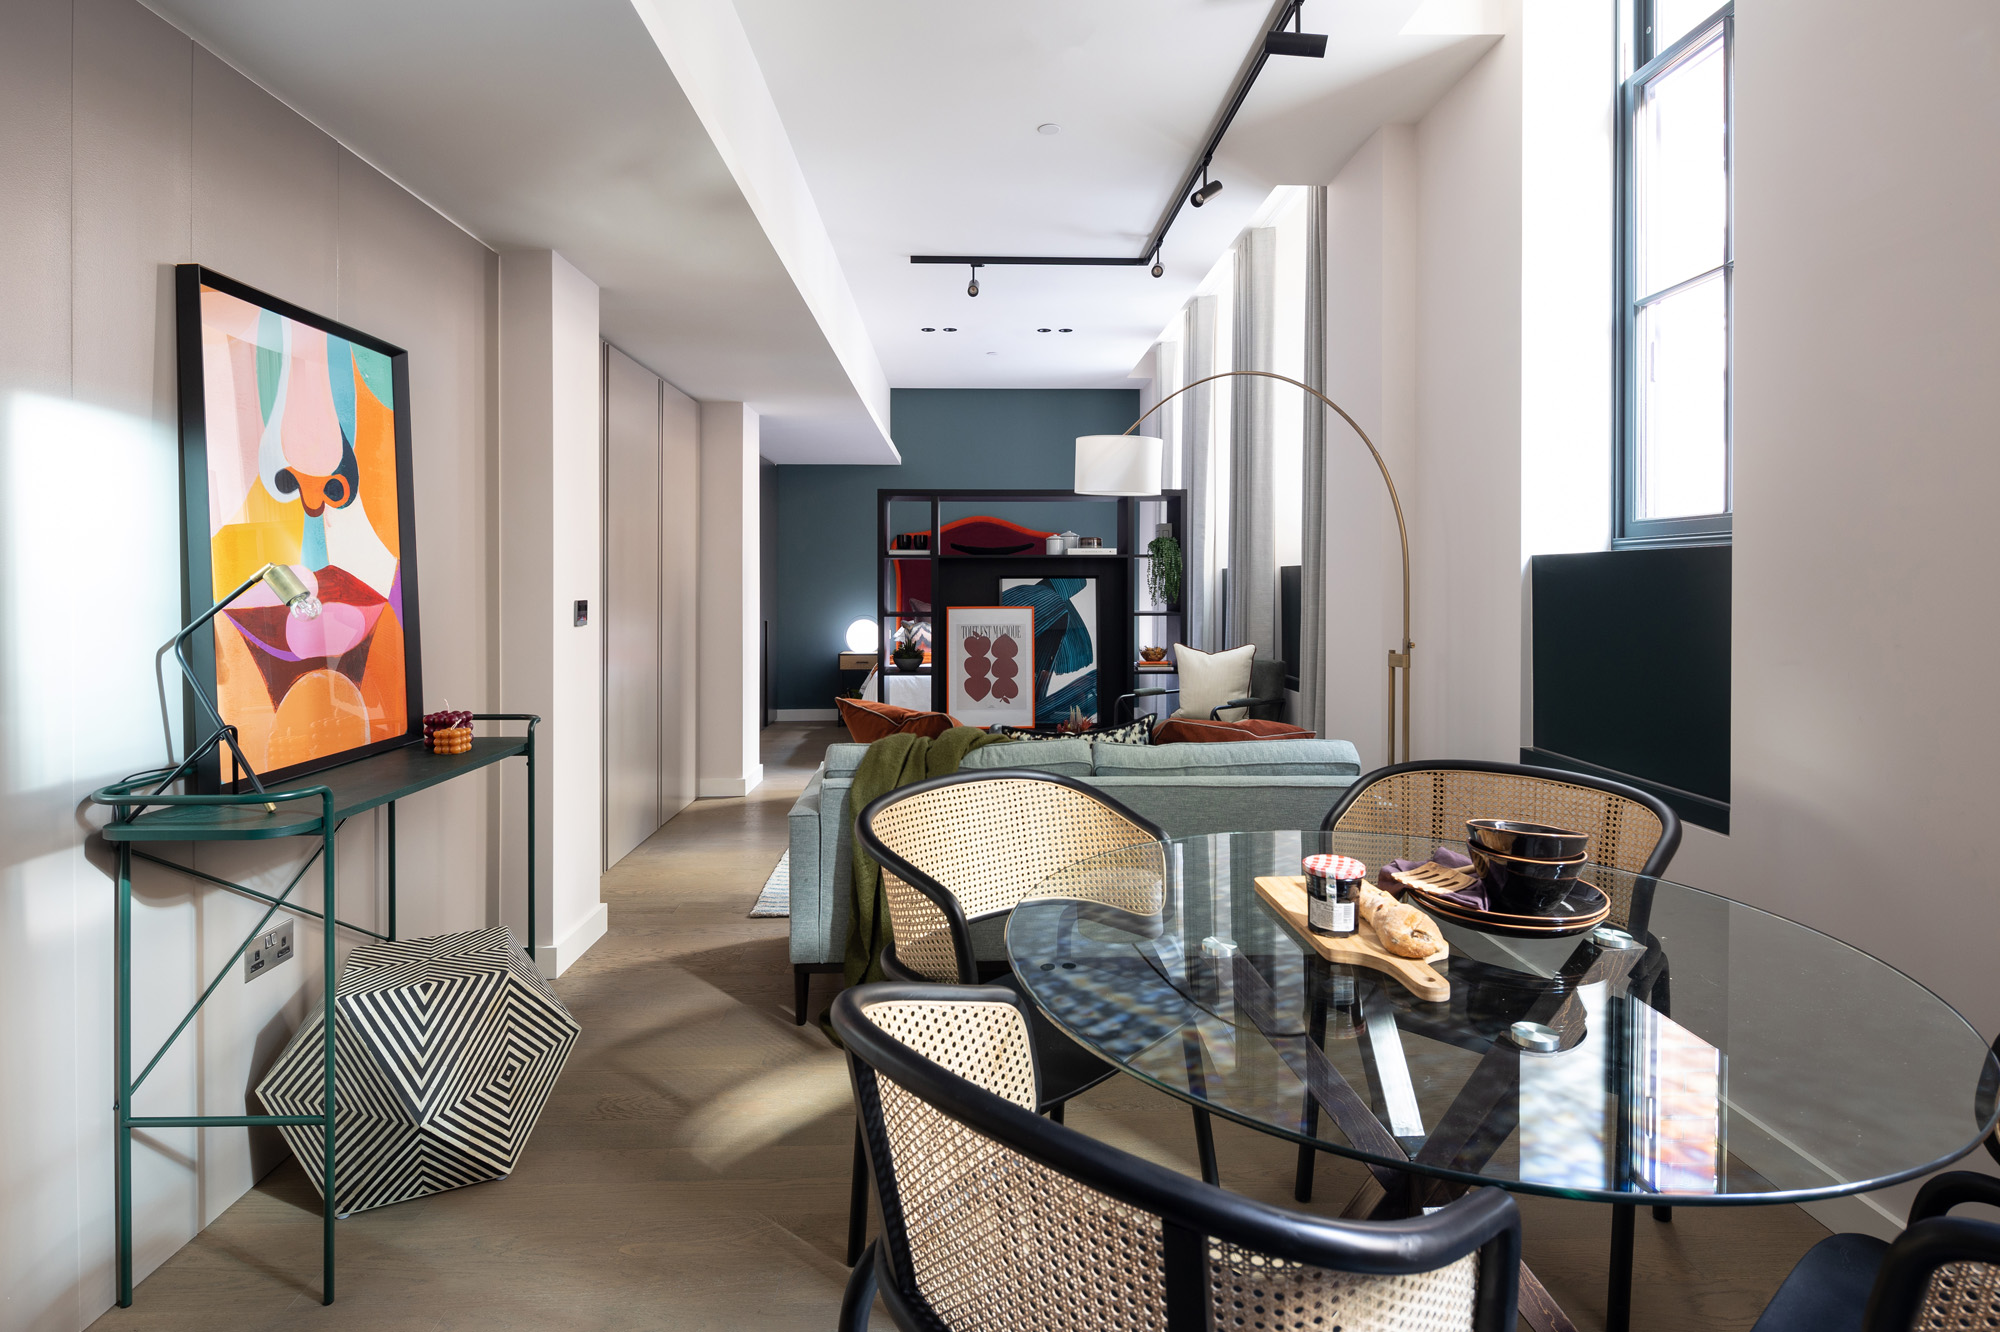 For Sale: Chapter House Chapter House Covent Garden Wc2 luxury studio apartment